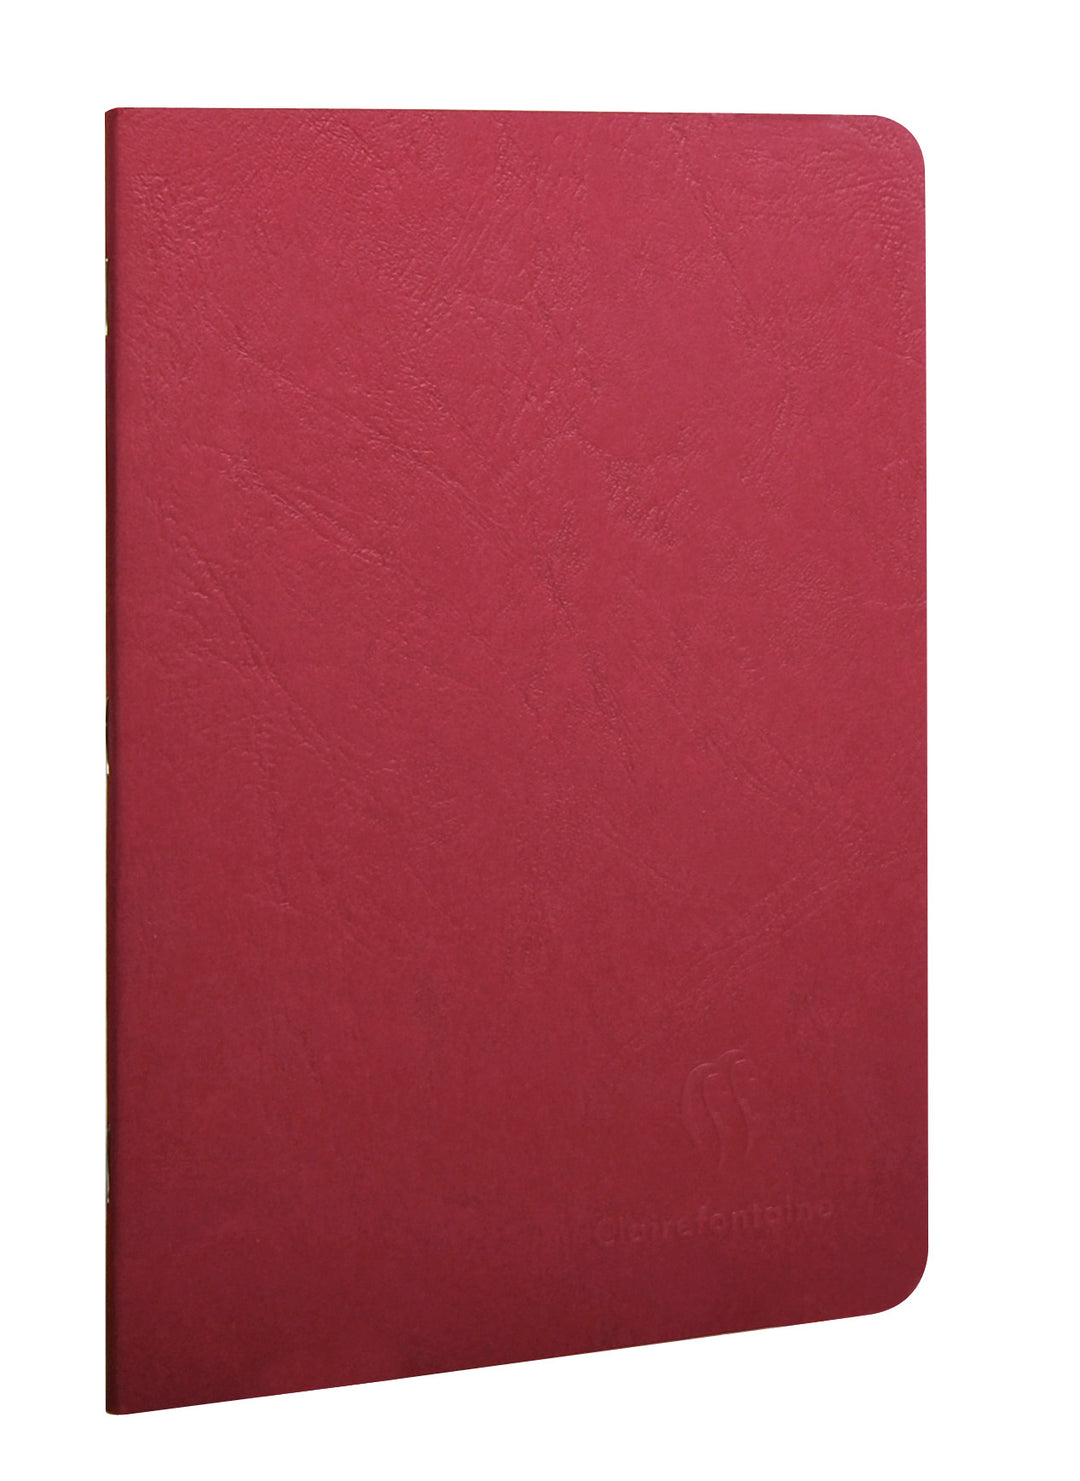 Clairefontaine Age Bag Blank Stapled Notebook - A4